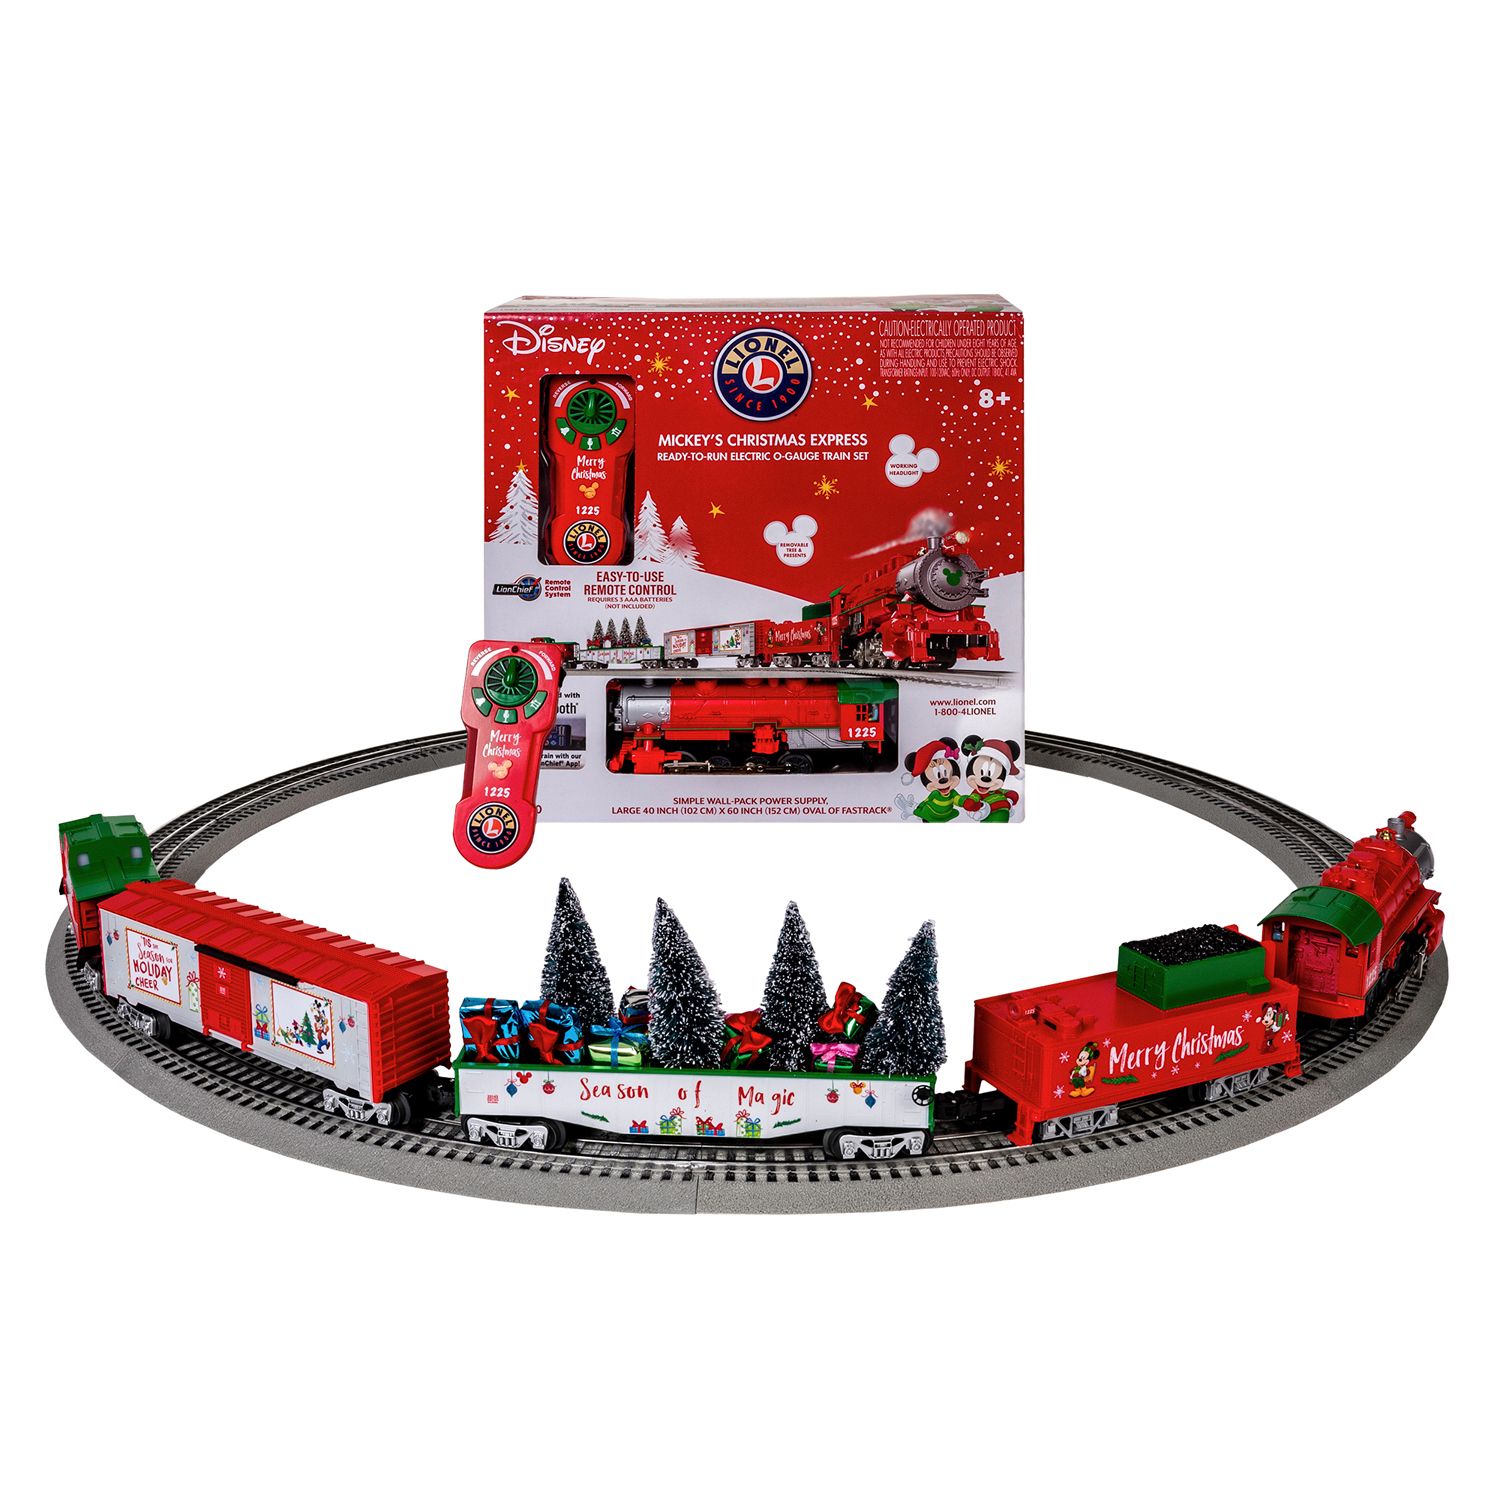 lionel mickey mouse & friends express lionchief set with bluetooth train set